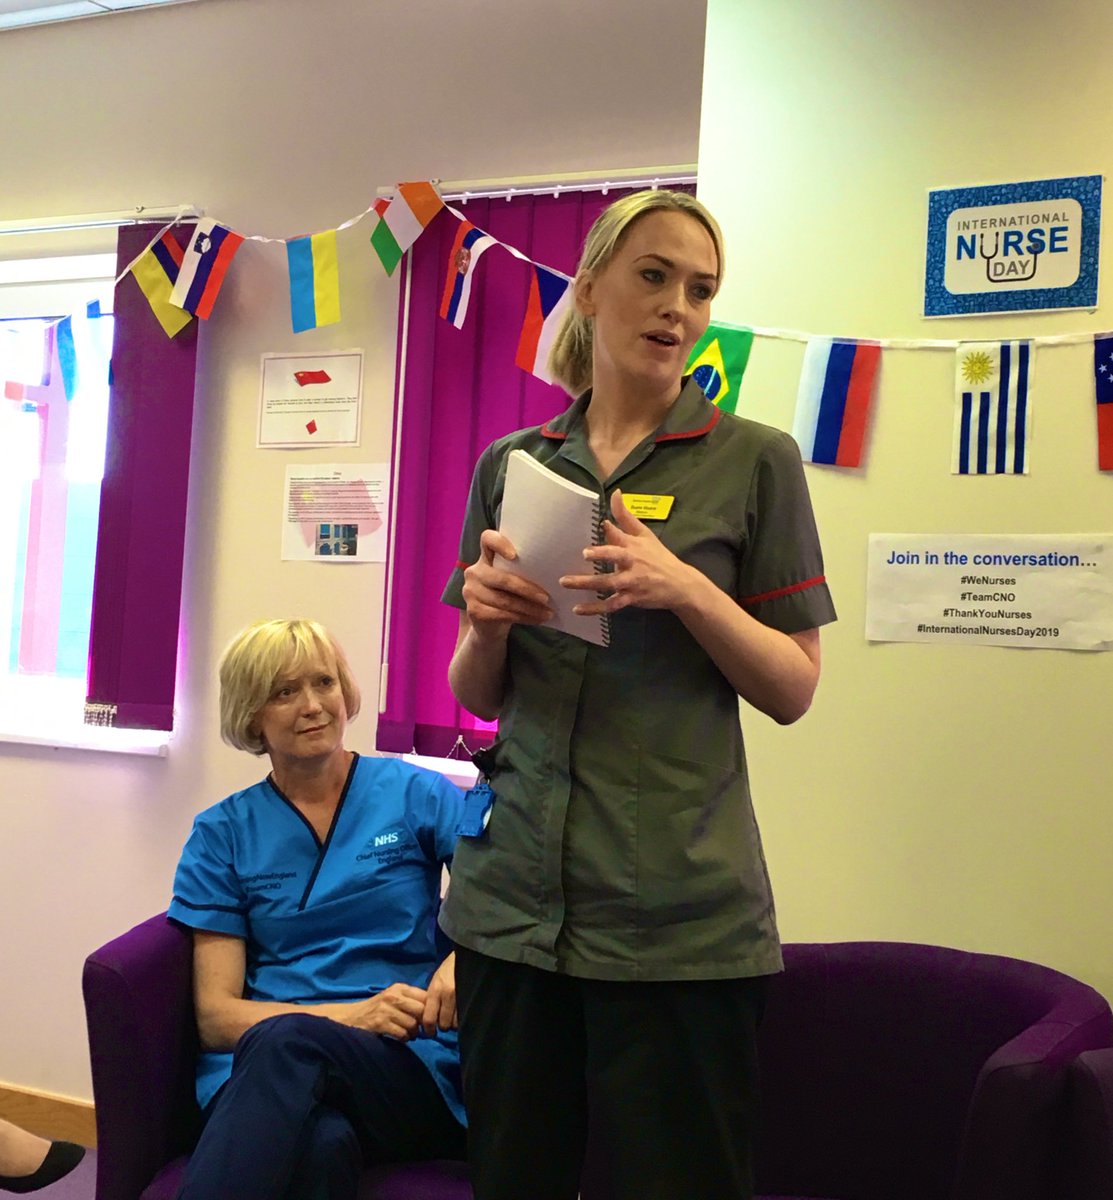 Suzanne Hoare, ED Matron @broomfieldnhs talks about her career in nursing & how her patients and nursing colleagues inspire her every day. She also tells a story of one of her early experiences working in A&E over a bank holiday and how it has shaped her whole career. #TeamCNO